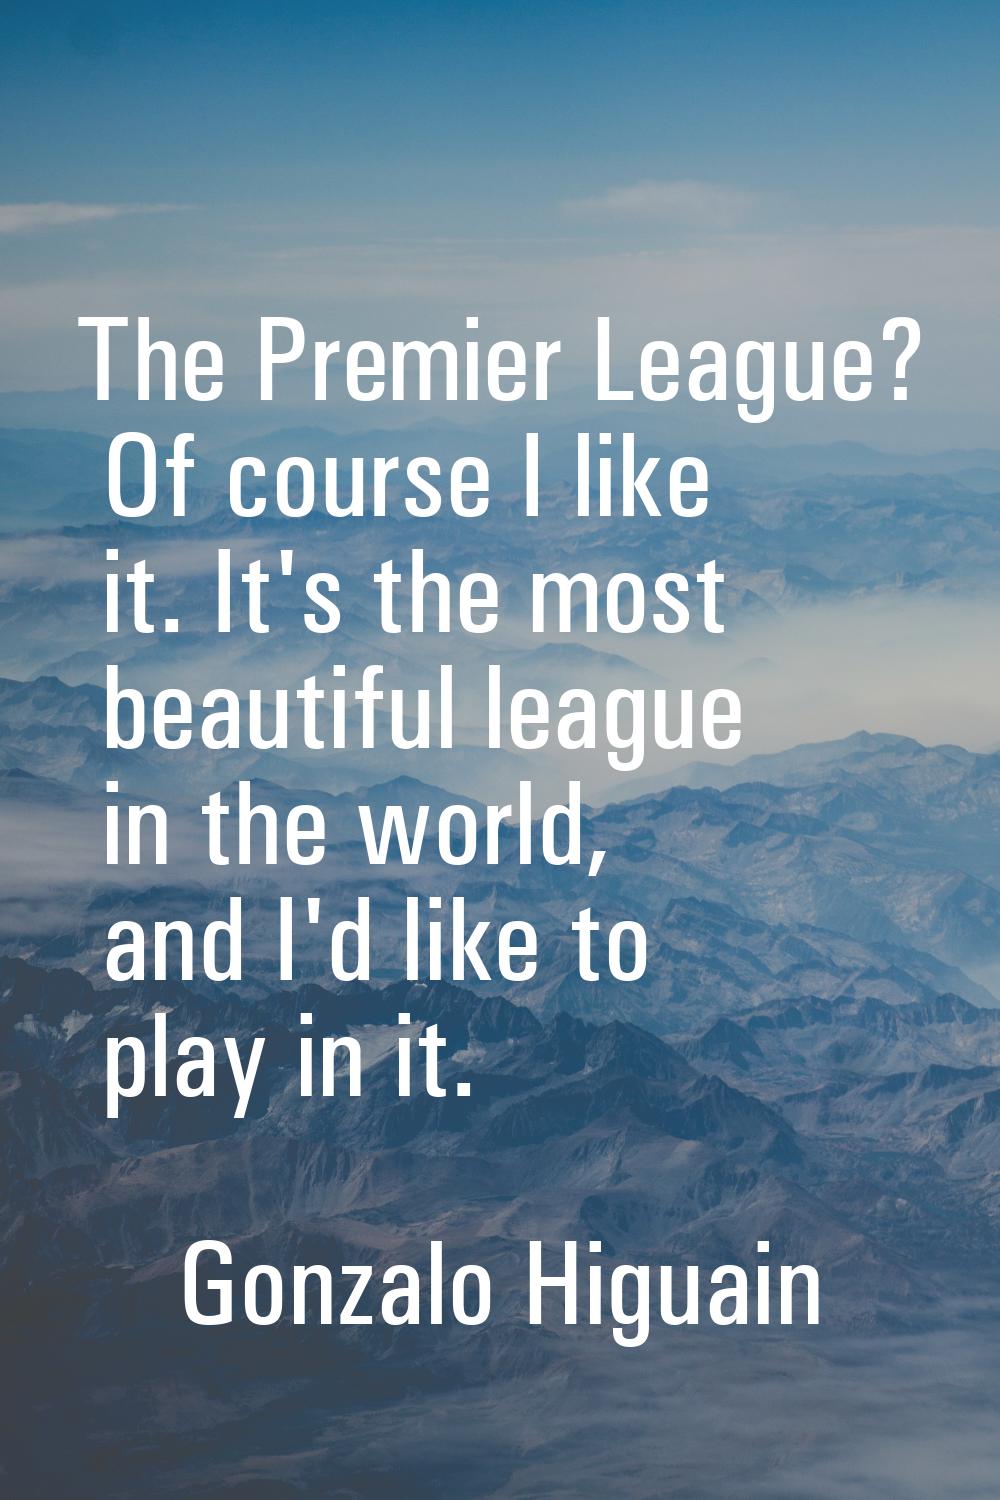 The Premier League? Of course I like it. It's the most beautiful league in the world, and I'd like 